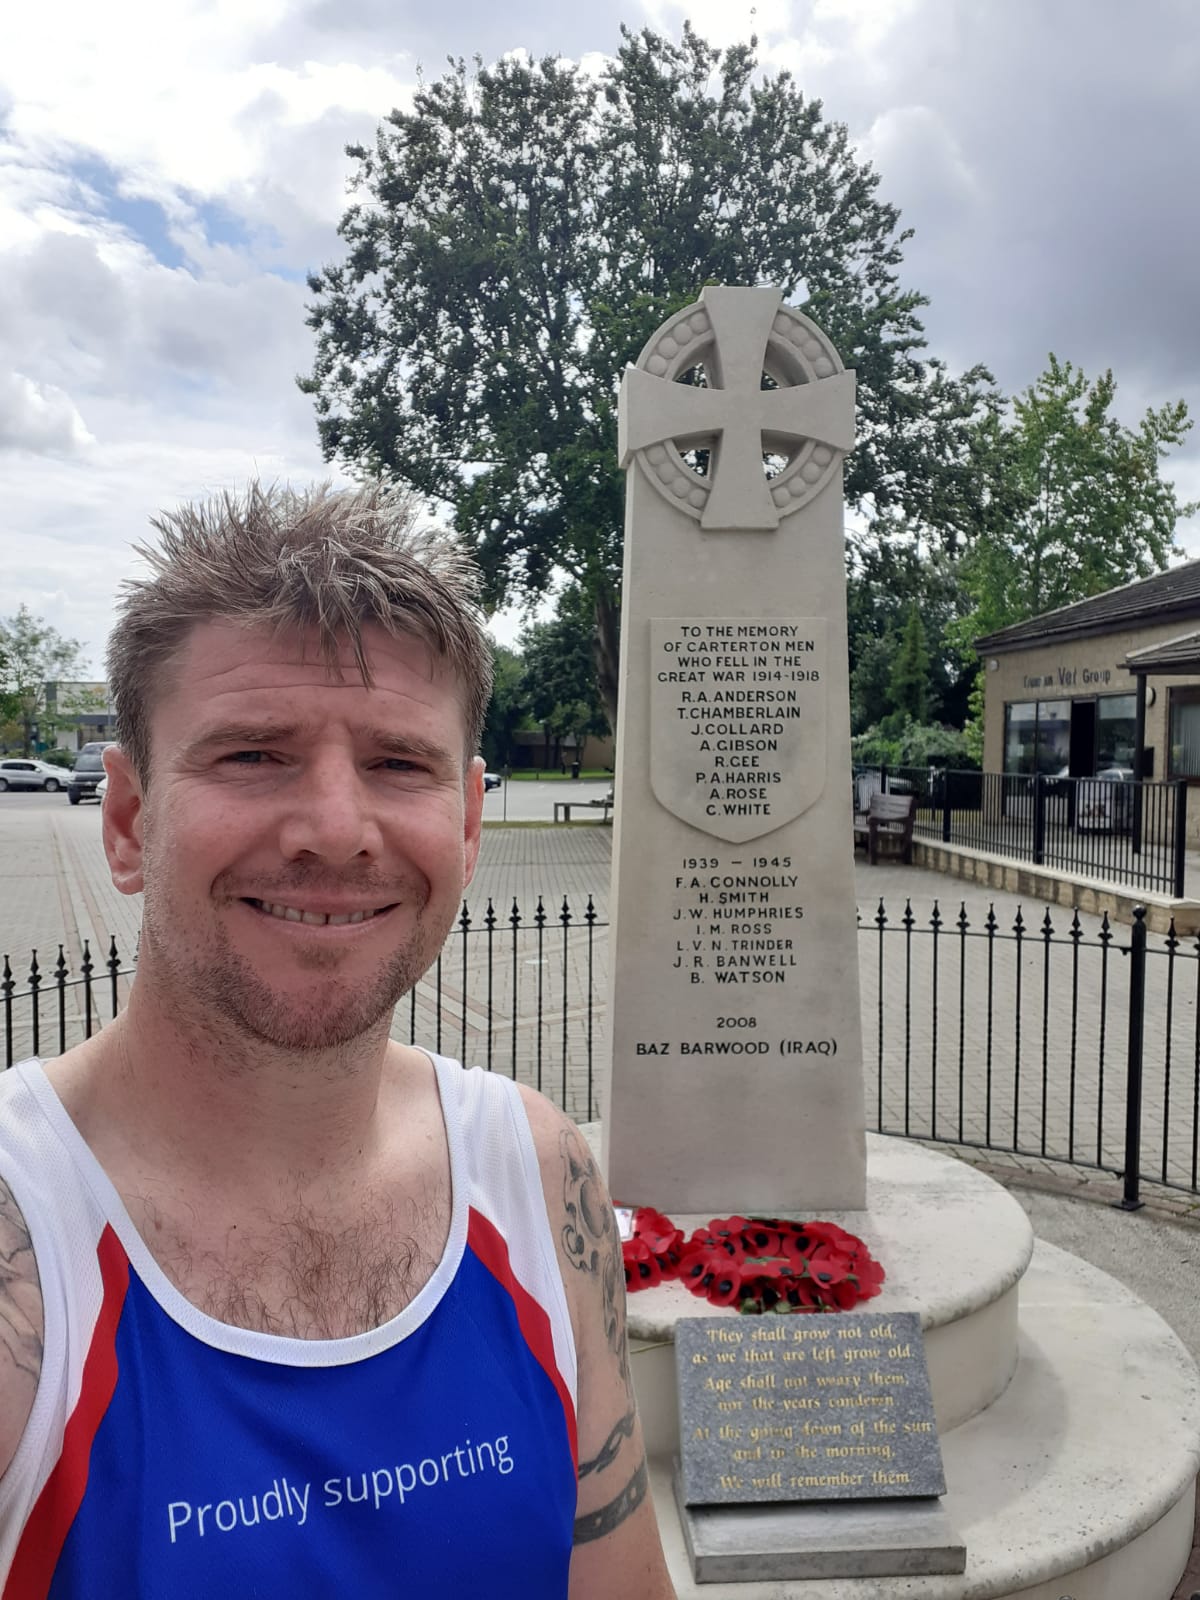 Corporal Hodgson, one of the Team’s Survival Equipment Technicians pictured during his challenge by the Carterton War Memorial